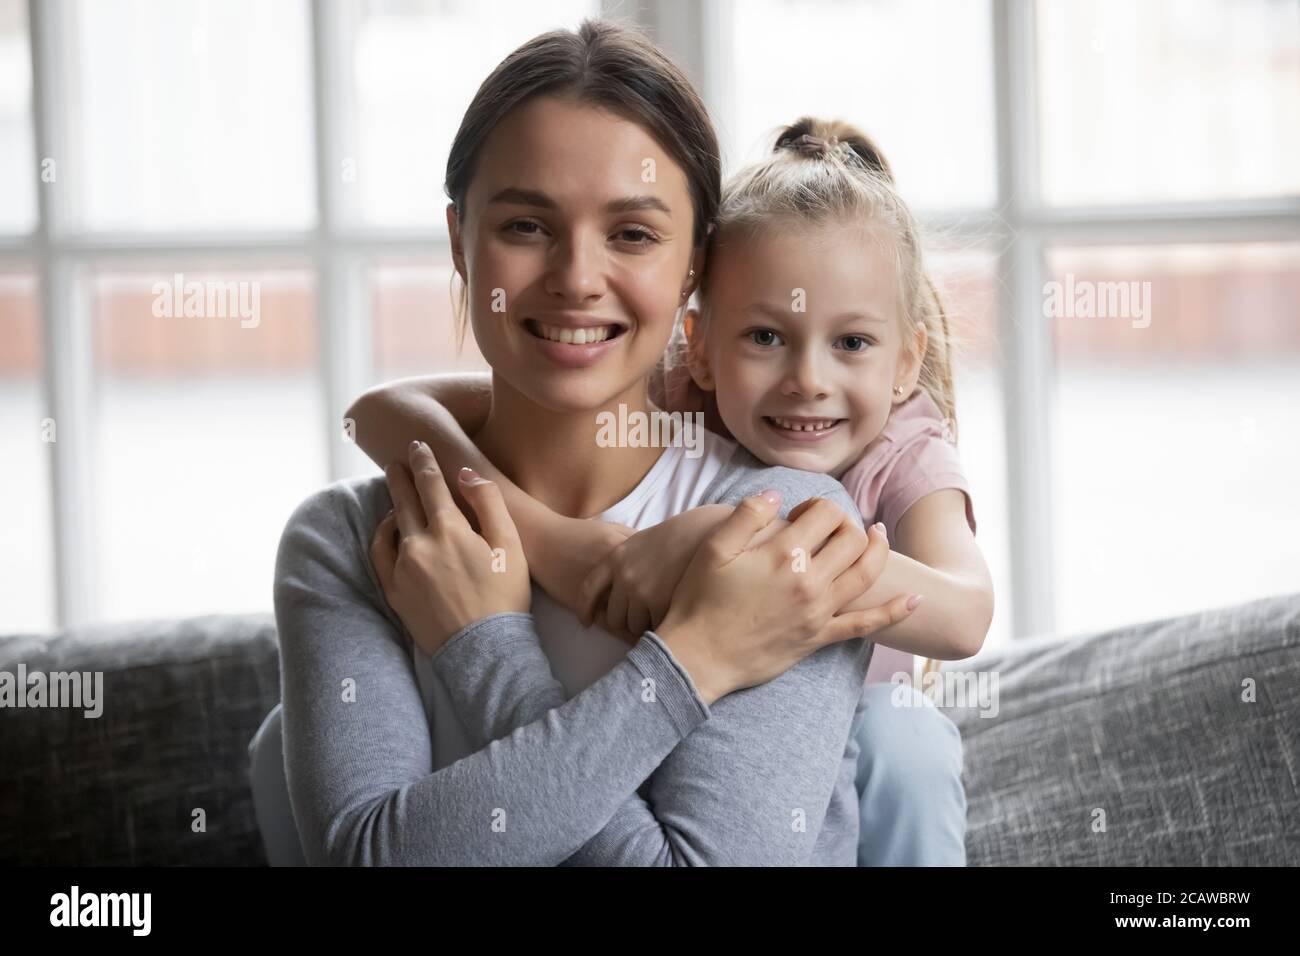 Cute little girl cuddling smiling beautiful young mother. Stock Photo